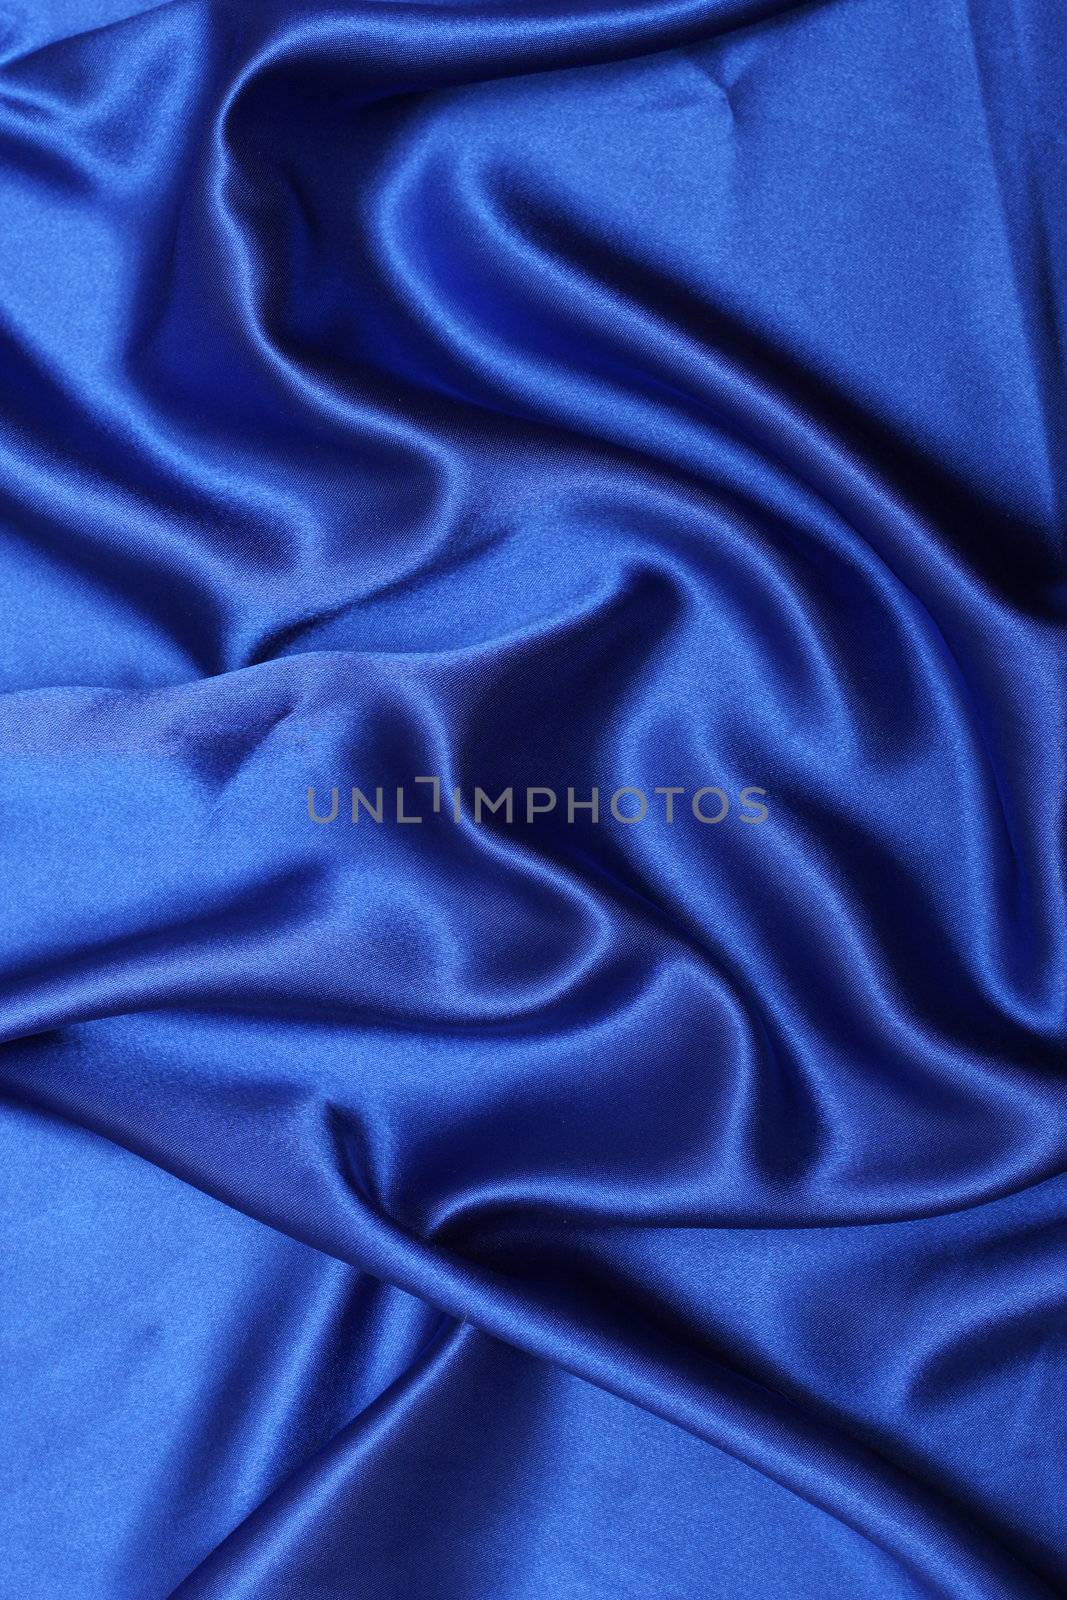 Blue satin background, nice texture, and patterns